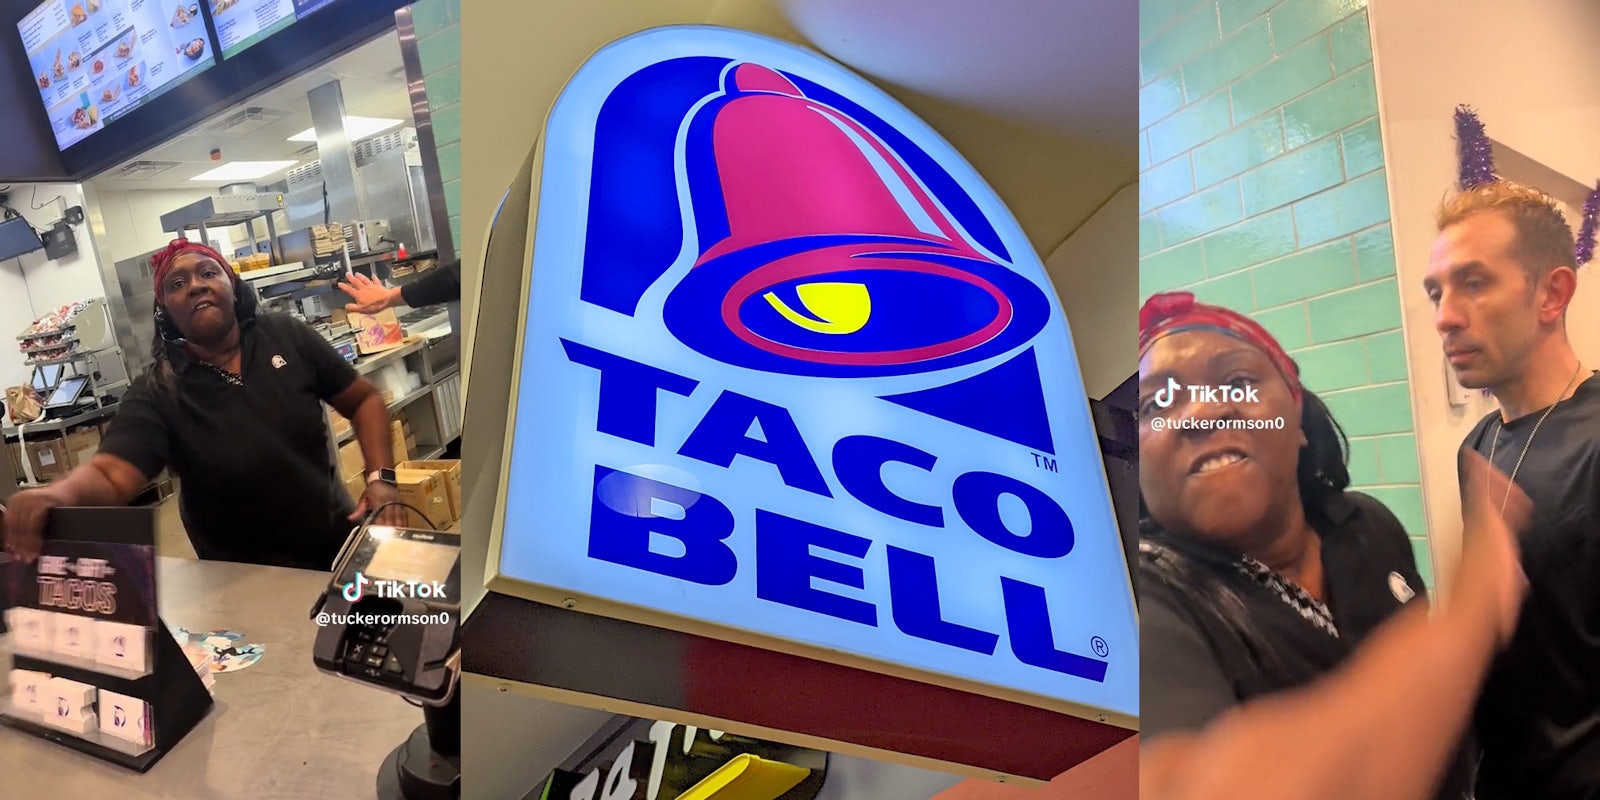 angry Taco Bell worker (l) Taco Bell sign (c) woman slapping at camera (r)